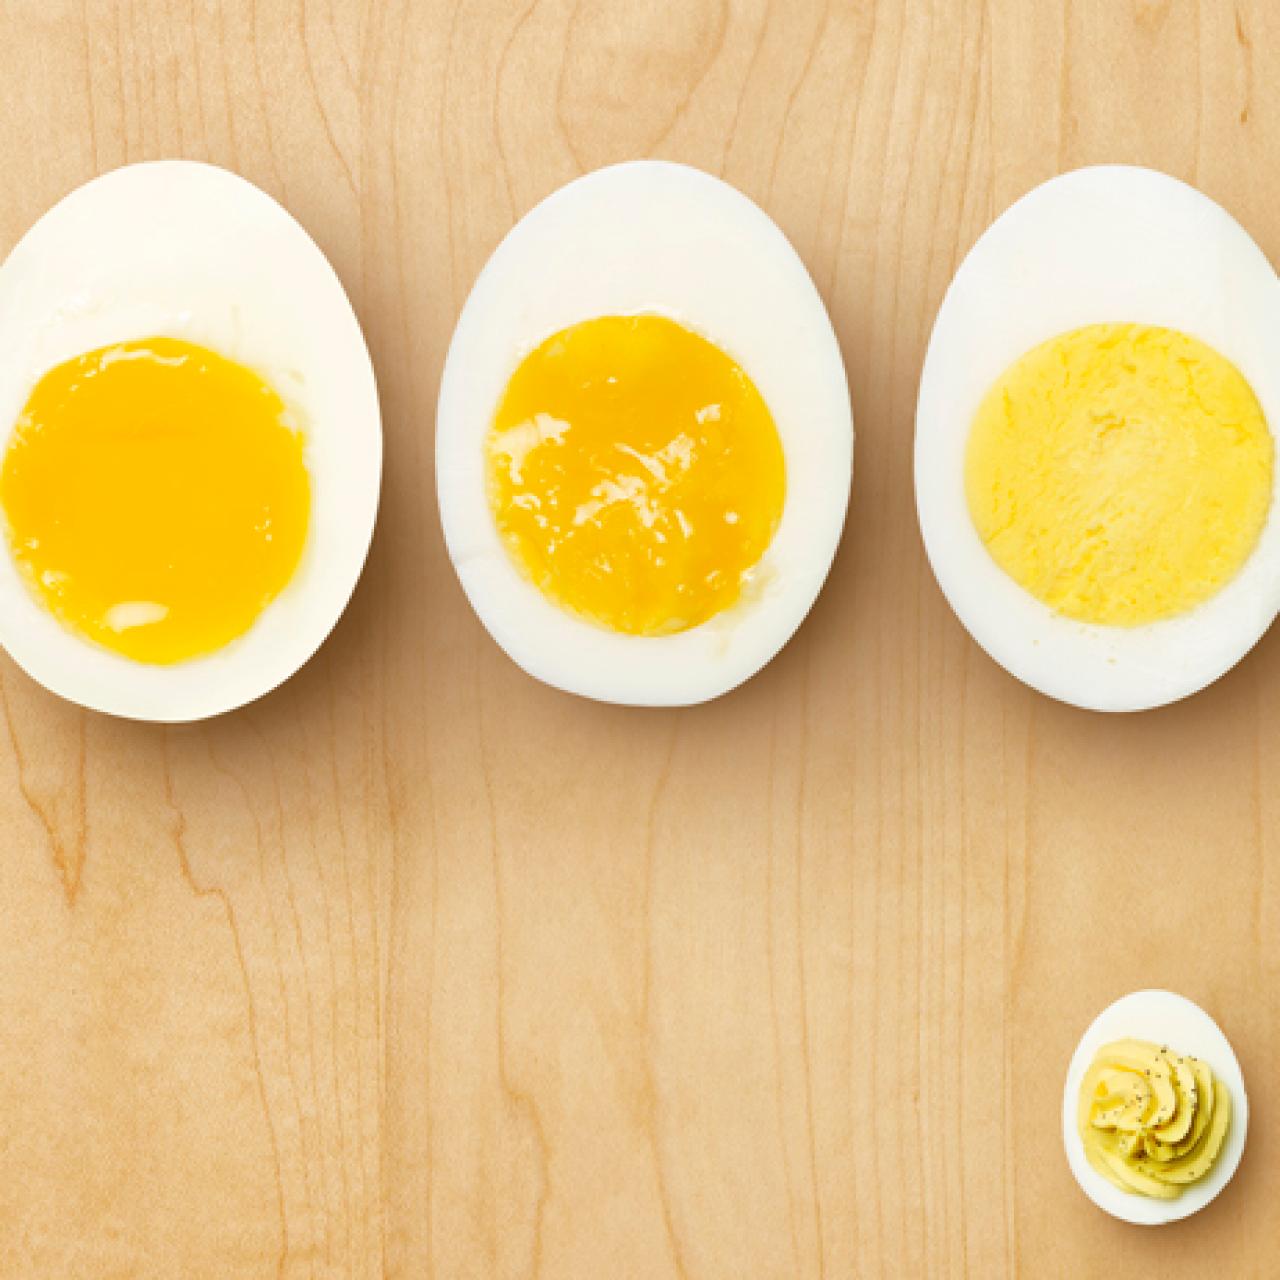 The Perfect Hard Boiled Egg Recipe (steps + Video)